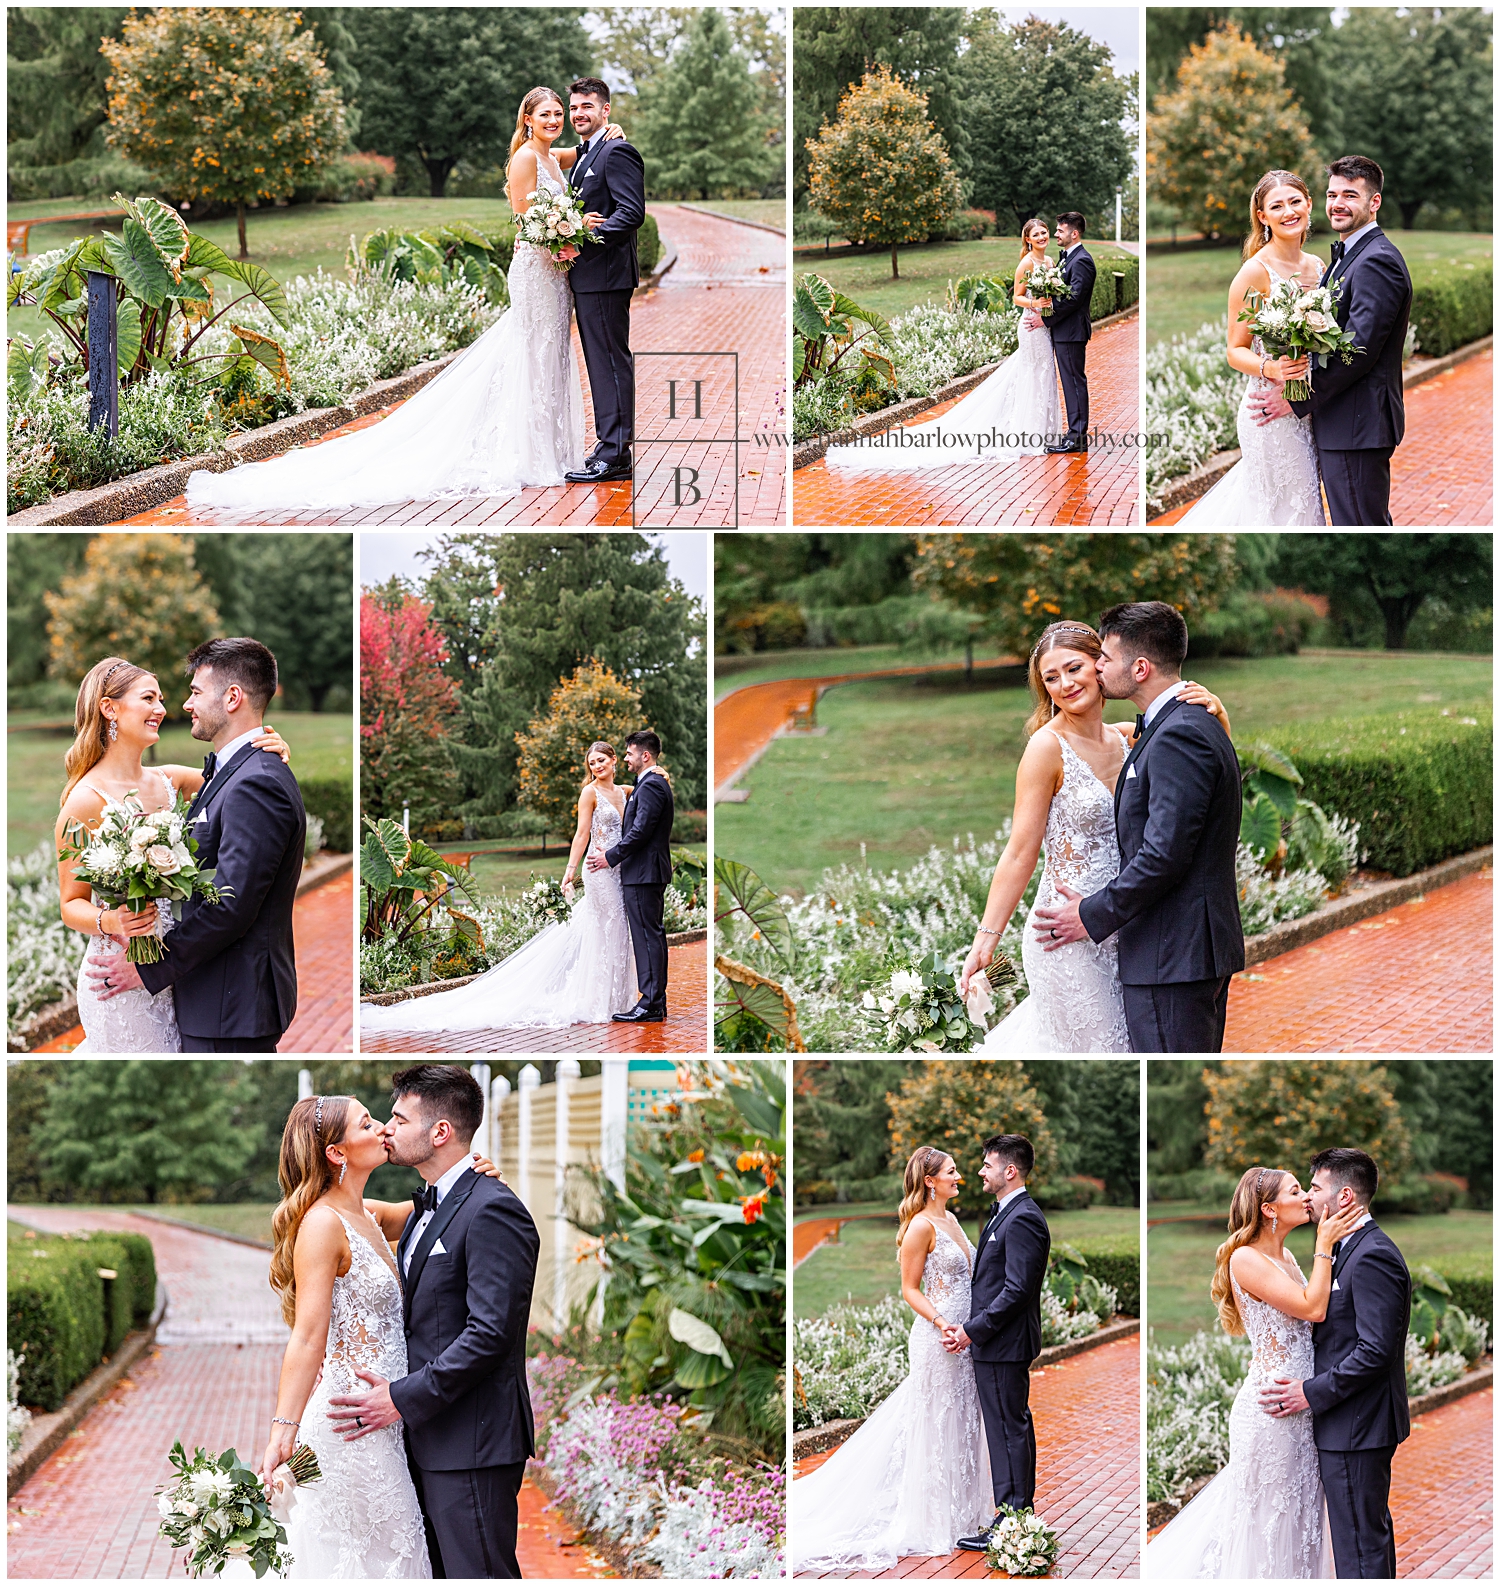 Collage of fall rainy wedding day photos with bride in white dress and groom in black tux.